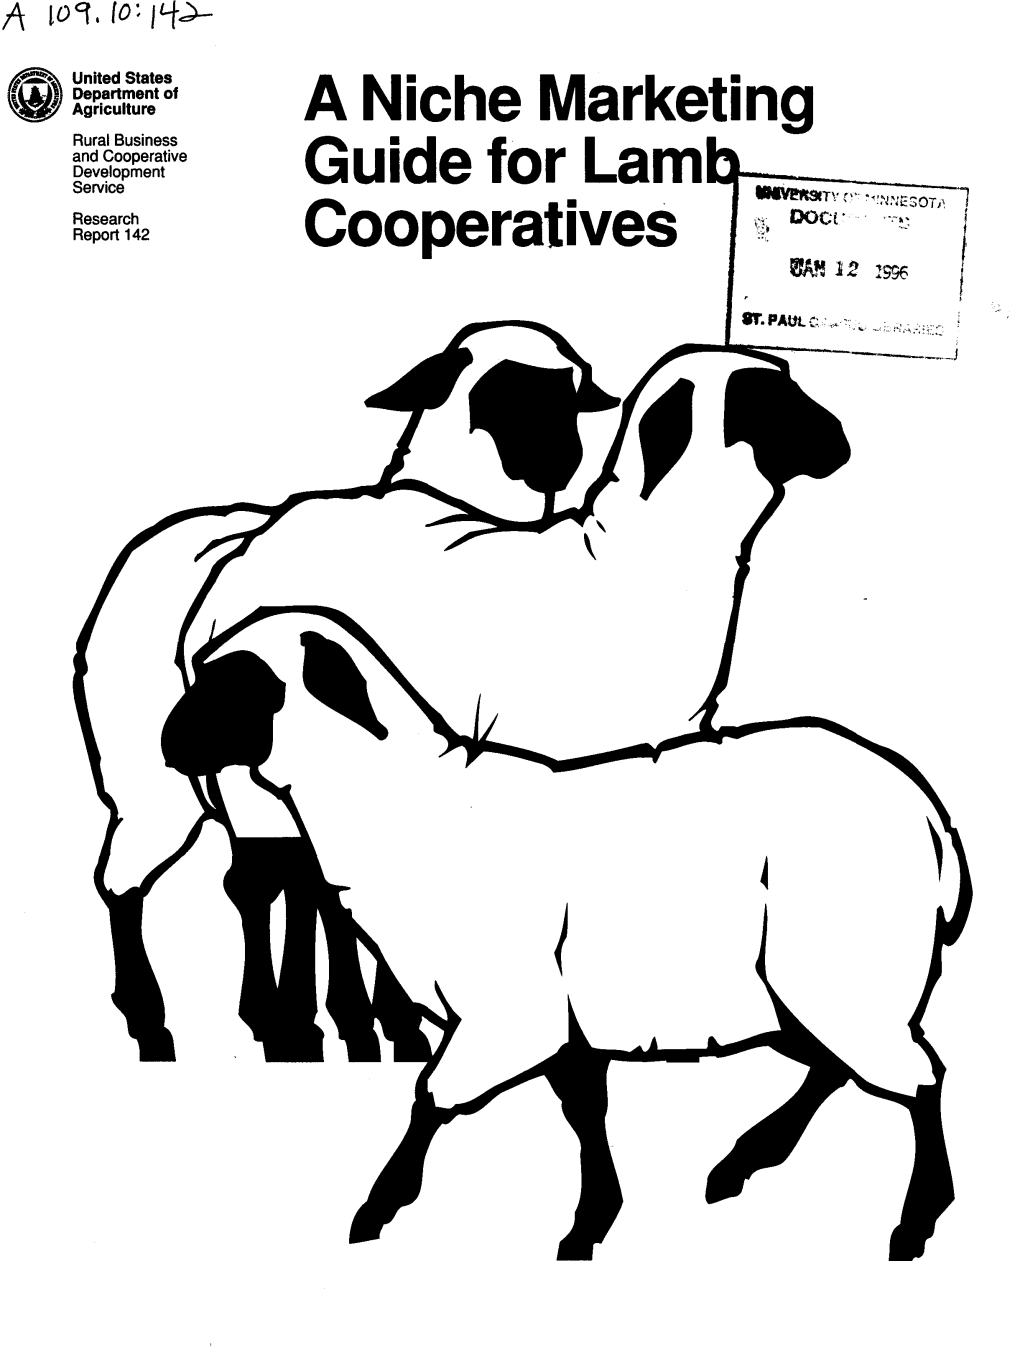 A Niche Marketing Guide for Lamb Cooperatives